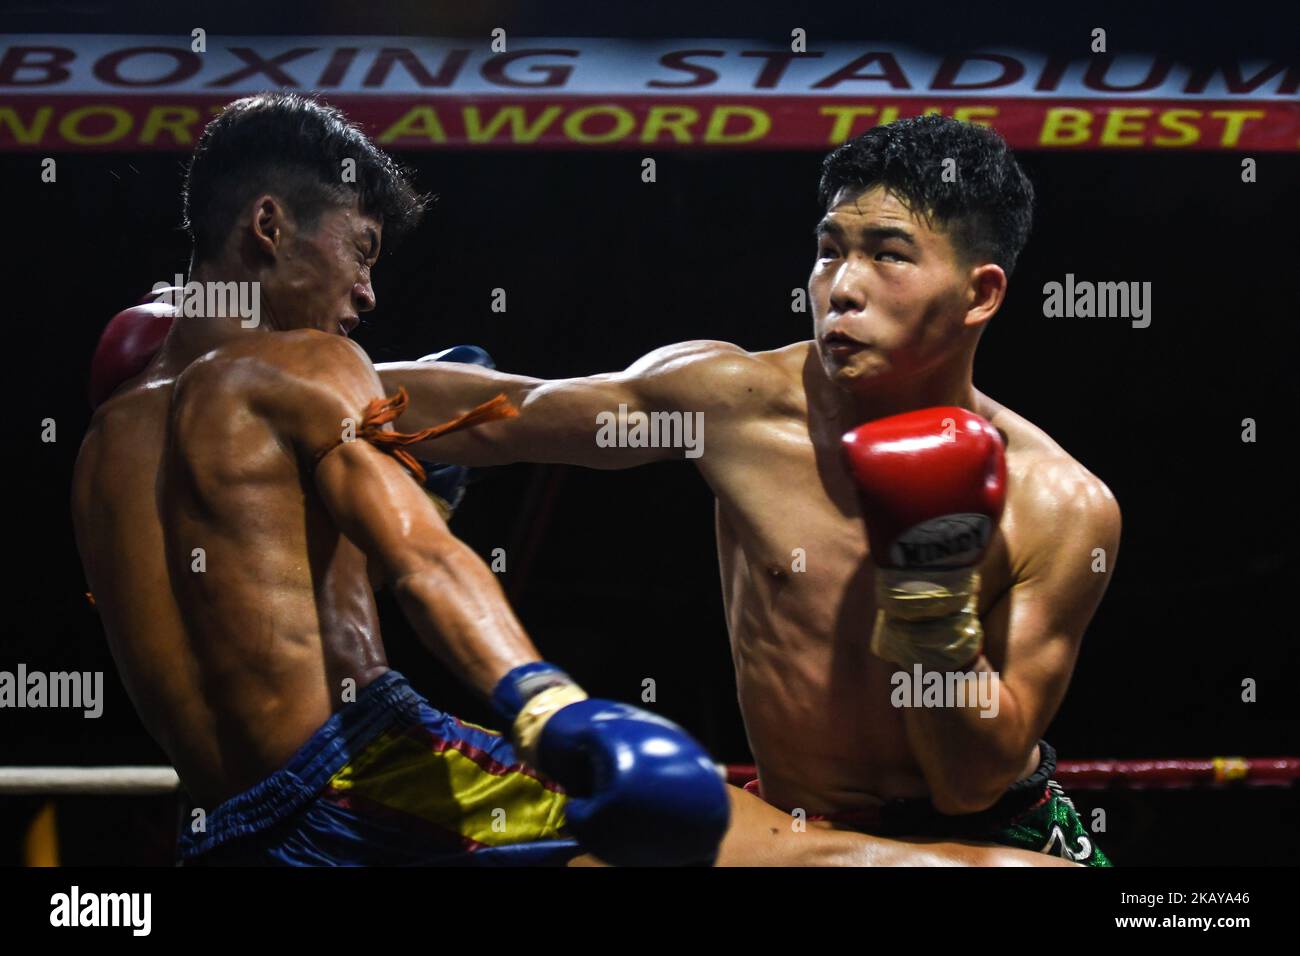 Thai boxing international combat between Aahuang Sitwungluang (CHINA - Red) vs Tulek (THAILAND - Blue) in -60kg category, during Muaythai Monday Evening International Thai Boxing Gala in Thaphae Stadium in Chiang Mai. On Monday, June 11, 2018, Chiang Mai, Chiang Mai Province, Thailand. (Photo by Artur Widak/NurPhoto)  Stock Photo